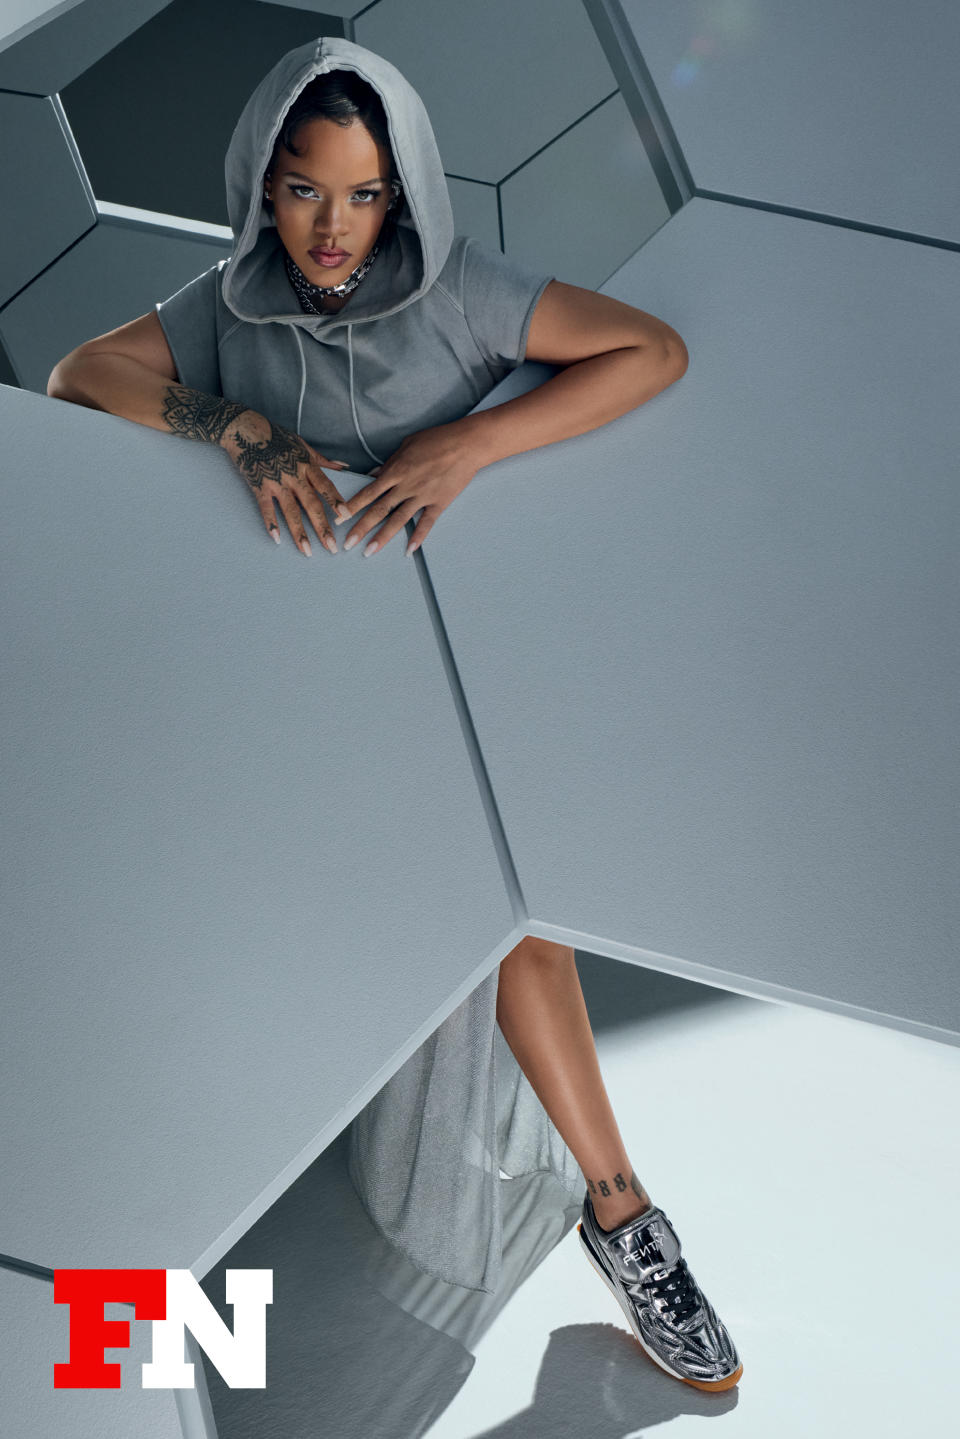 Rihanna stars in her first campaign back at Puma